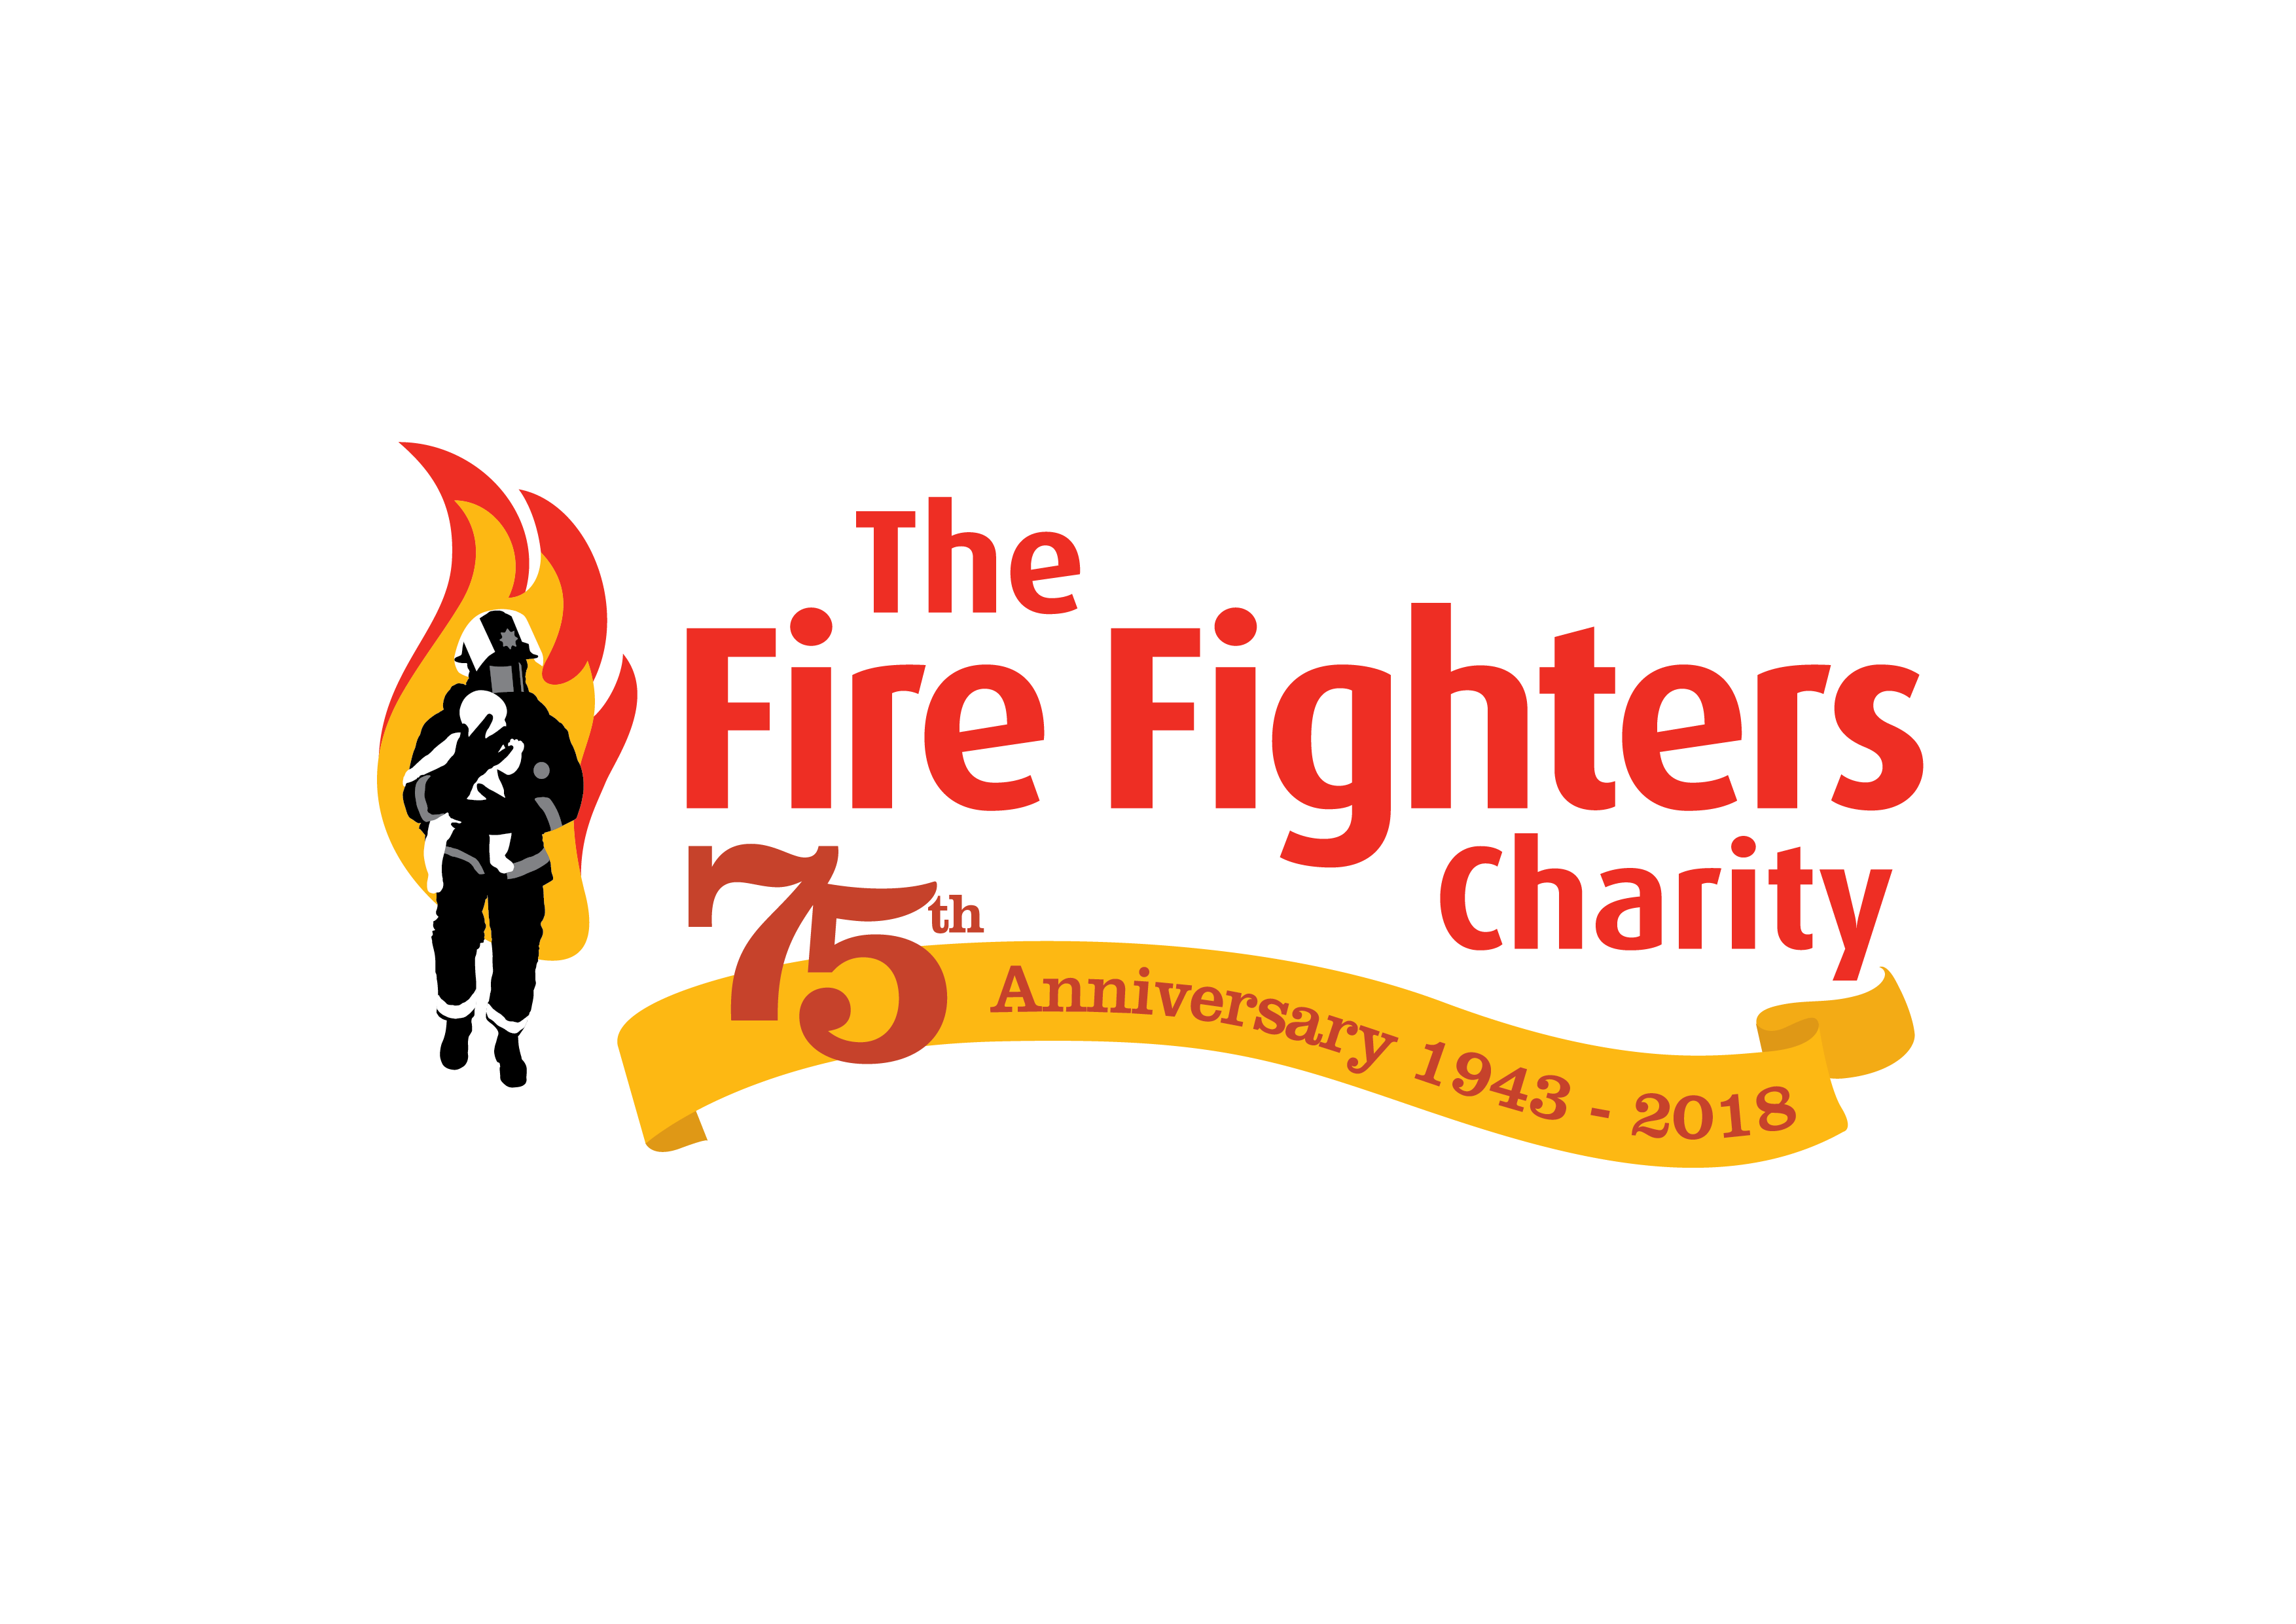 Chartiy Logo - 2018 sees new logo launched – Fire Fighters